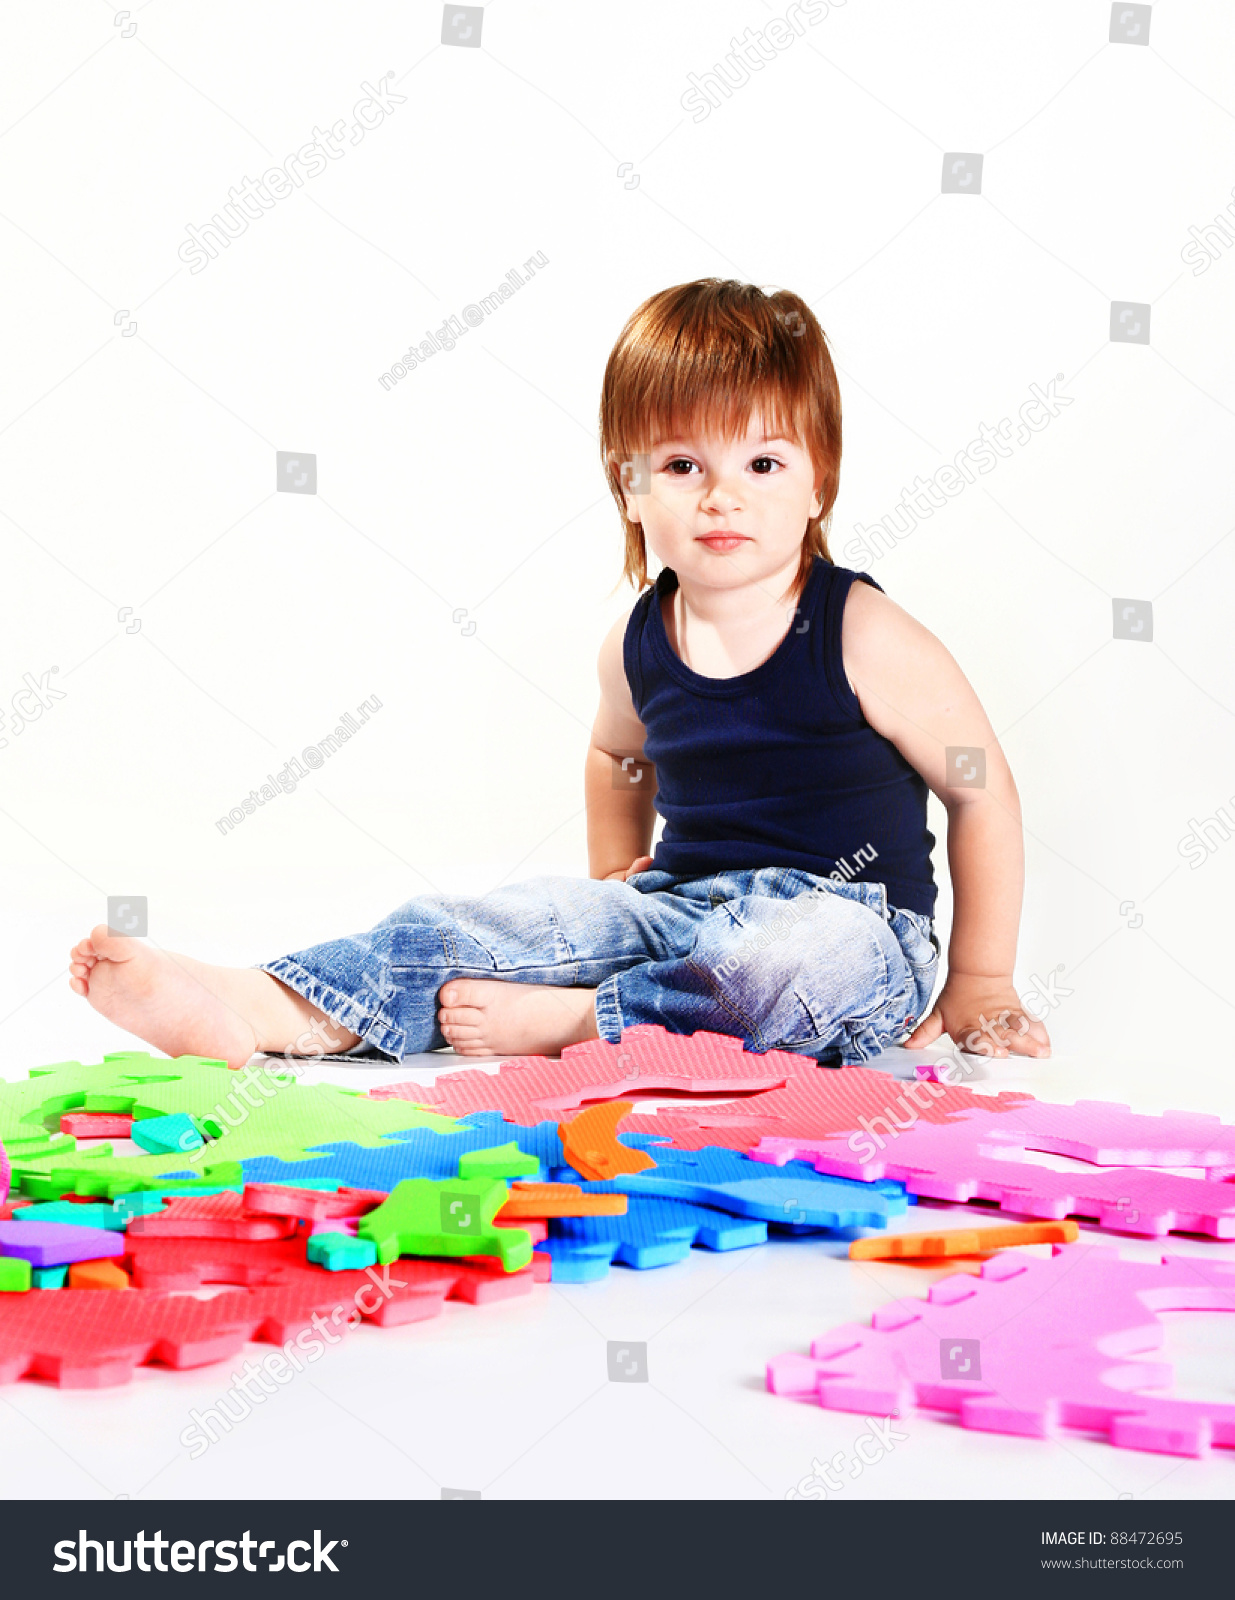 Cute Kid Playing Game Stock Photo (Royalty Free) 88472695 - Shutterstock